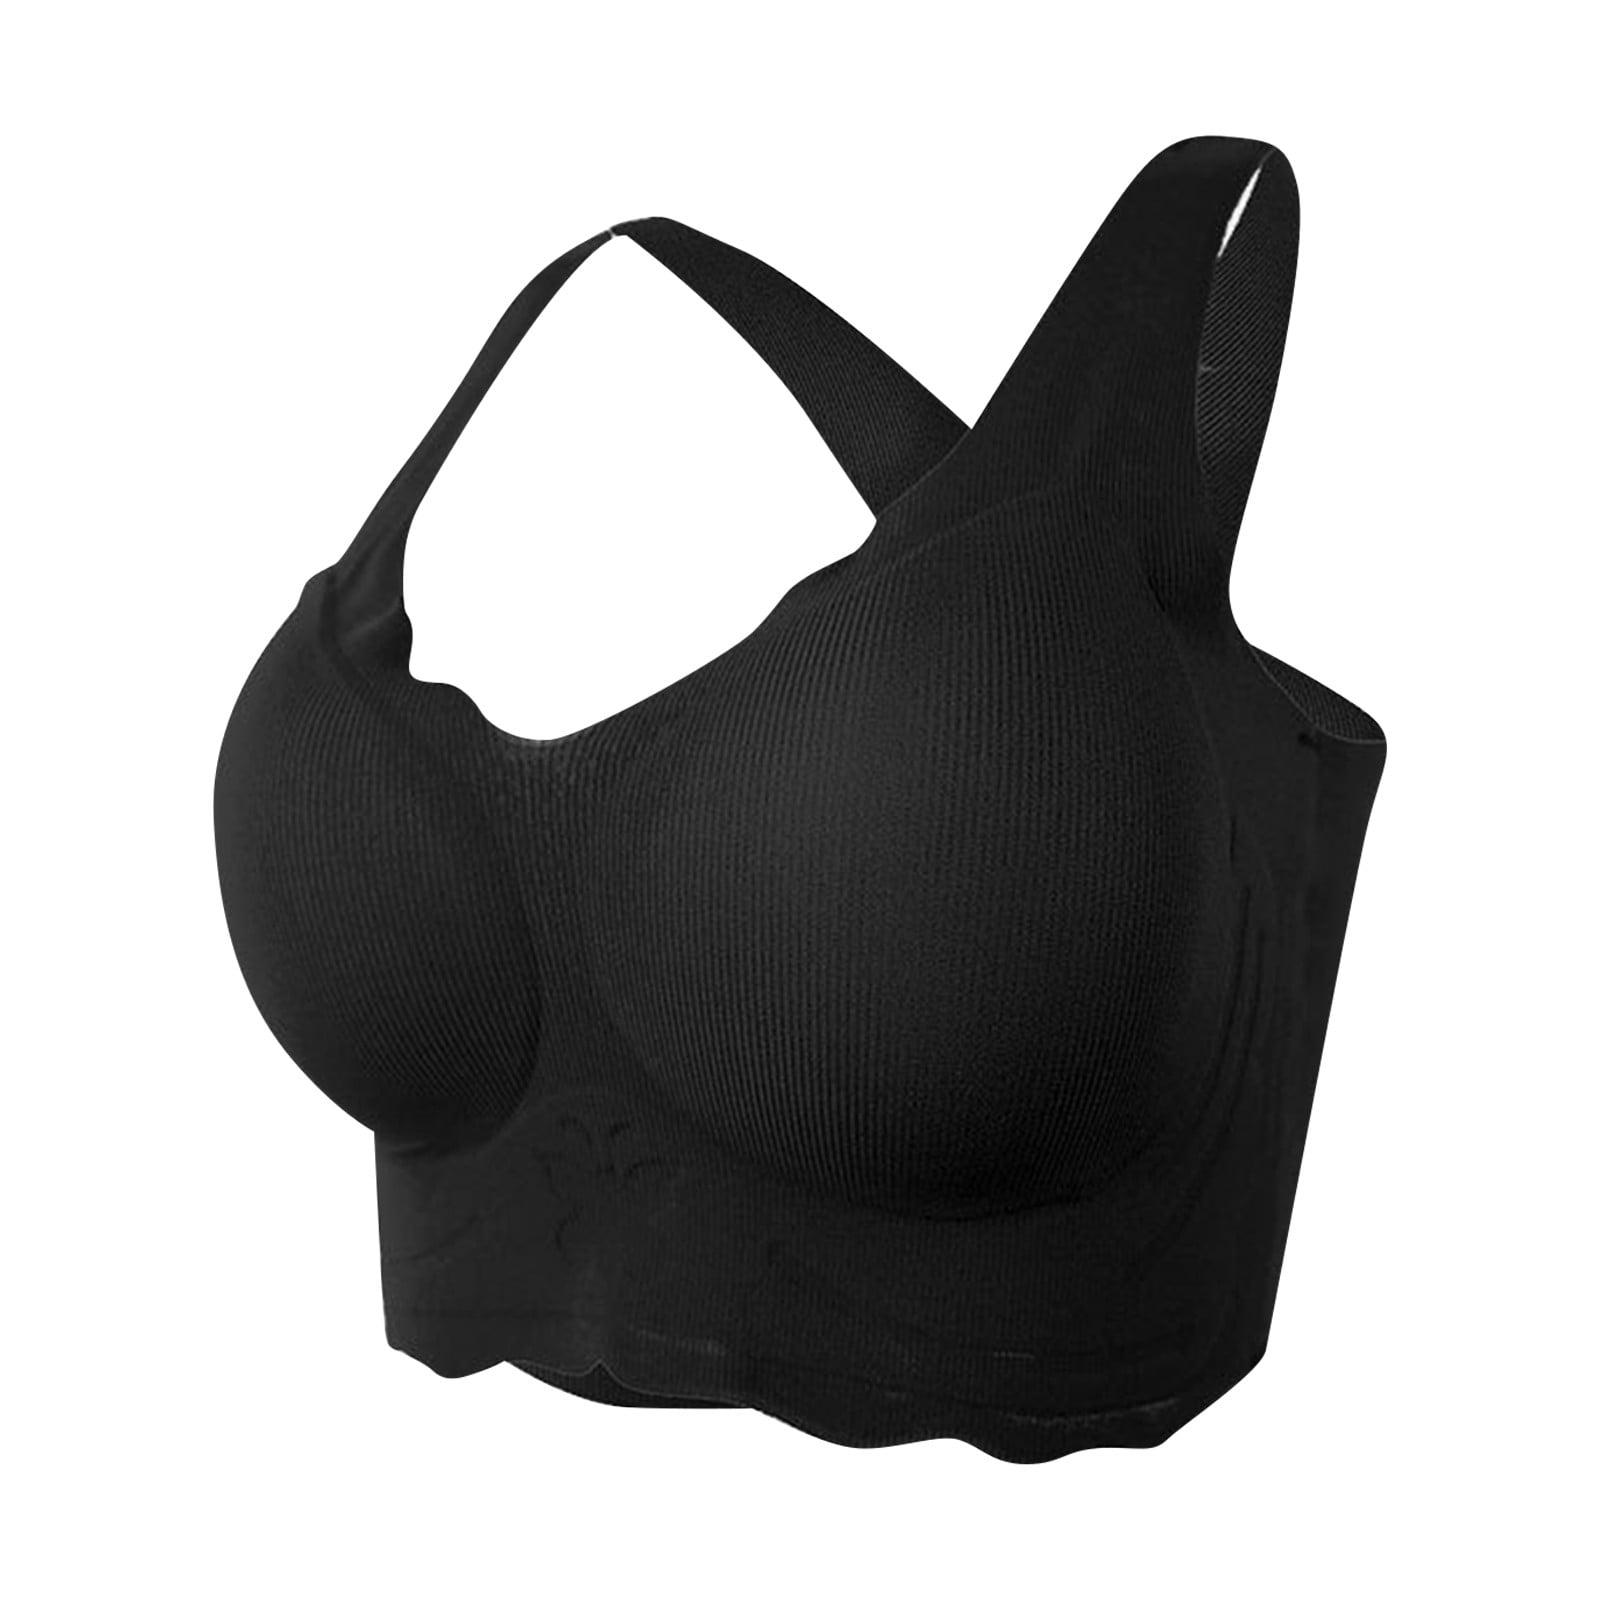 Kddylitq Cloud Bras Smoothing Seamless Full Bodysuit Compression Seamless  Placed Push Up Bar Bralette Running Wireless Sport Adjustable Bras  Smoothing